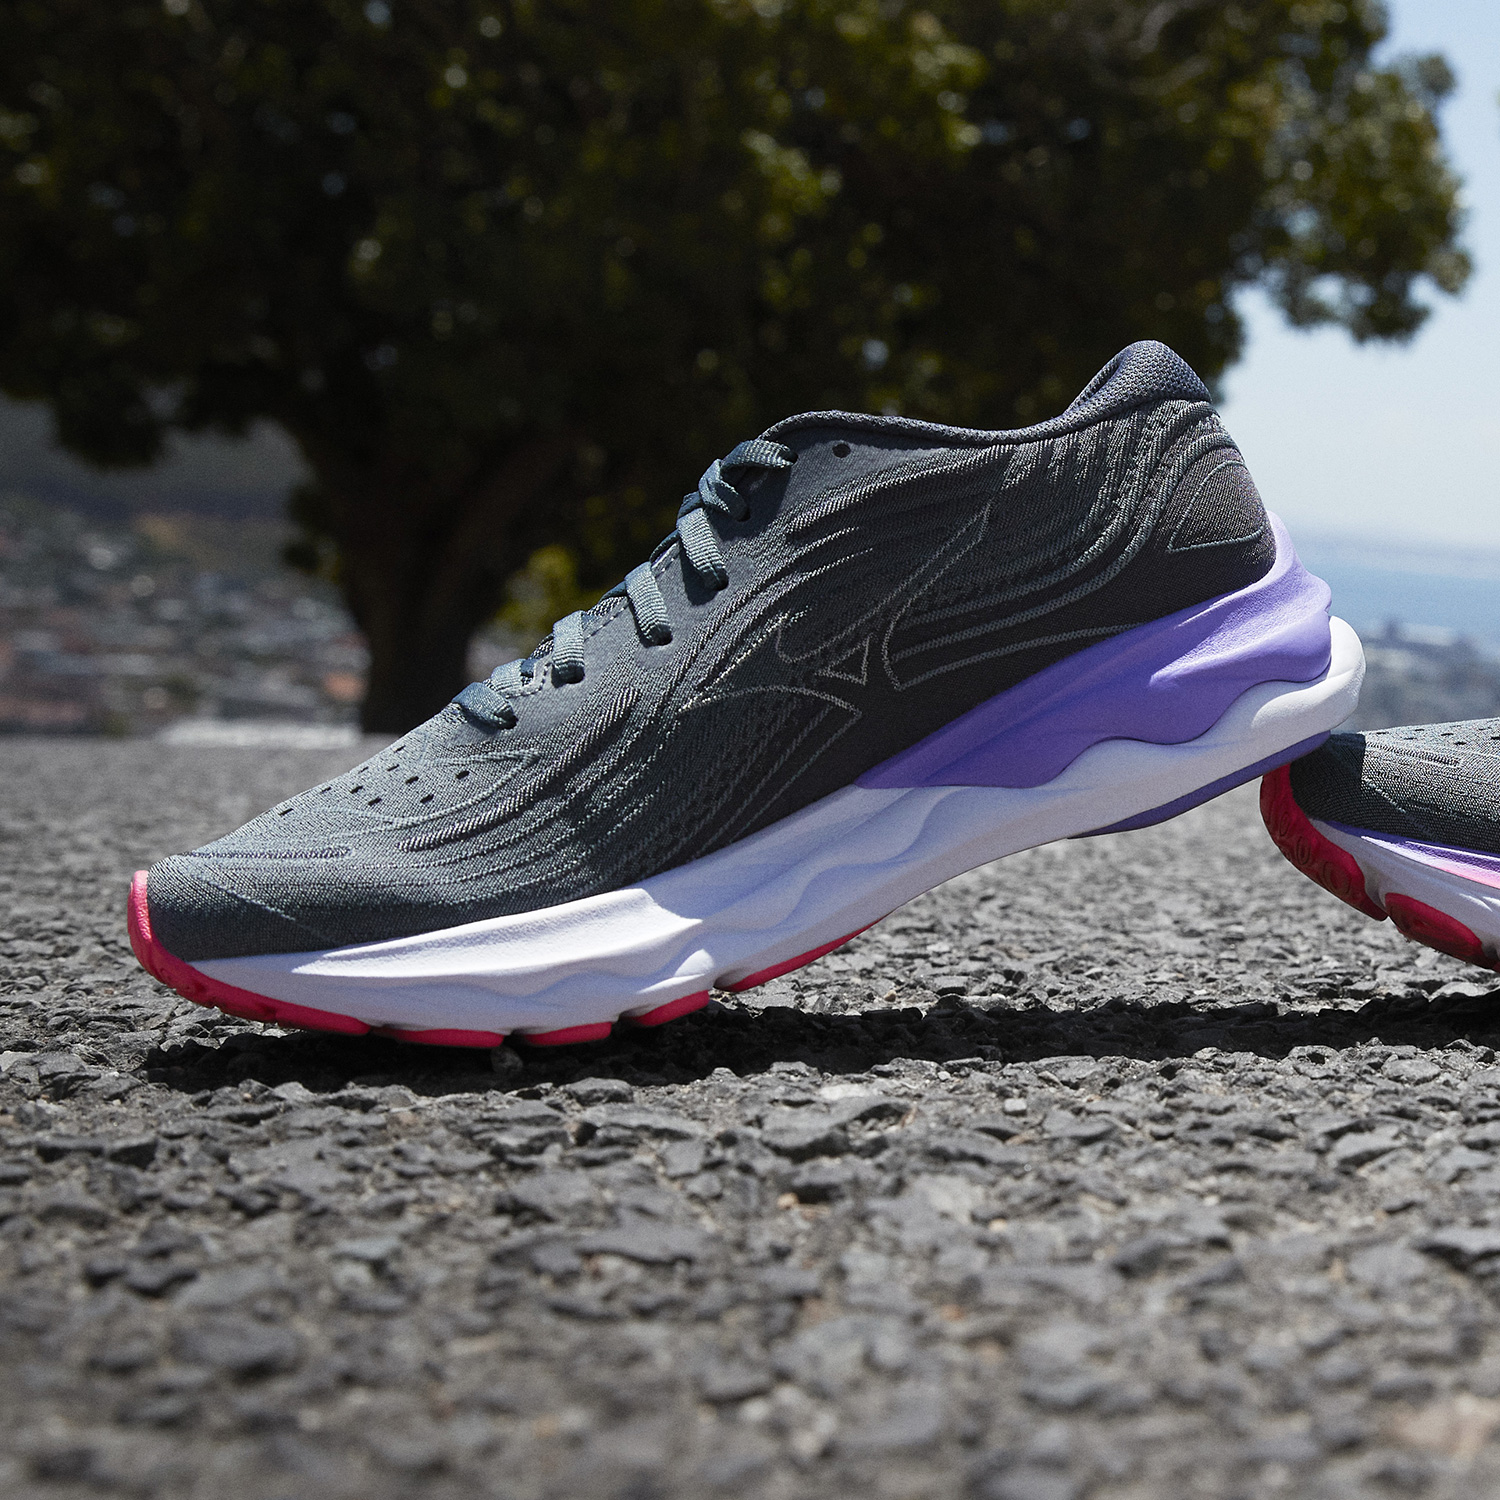 Mizuno Wave Skyrise 4 - Stormy Weather/Pearl Blue/Purple Punch